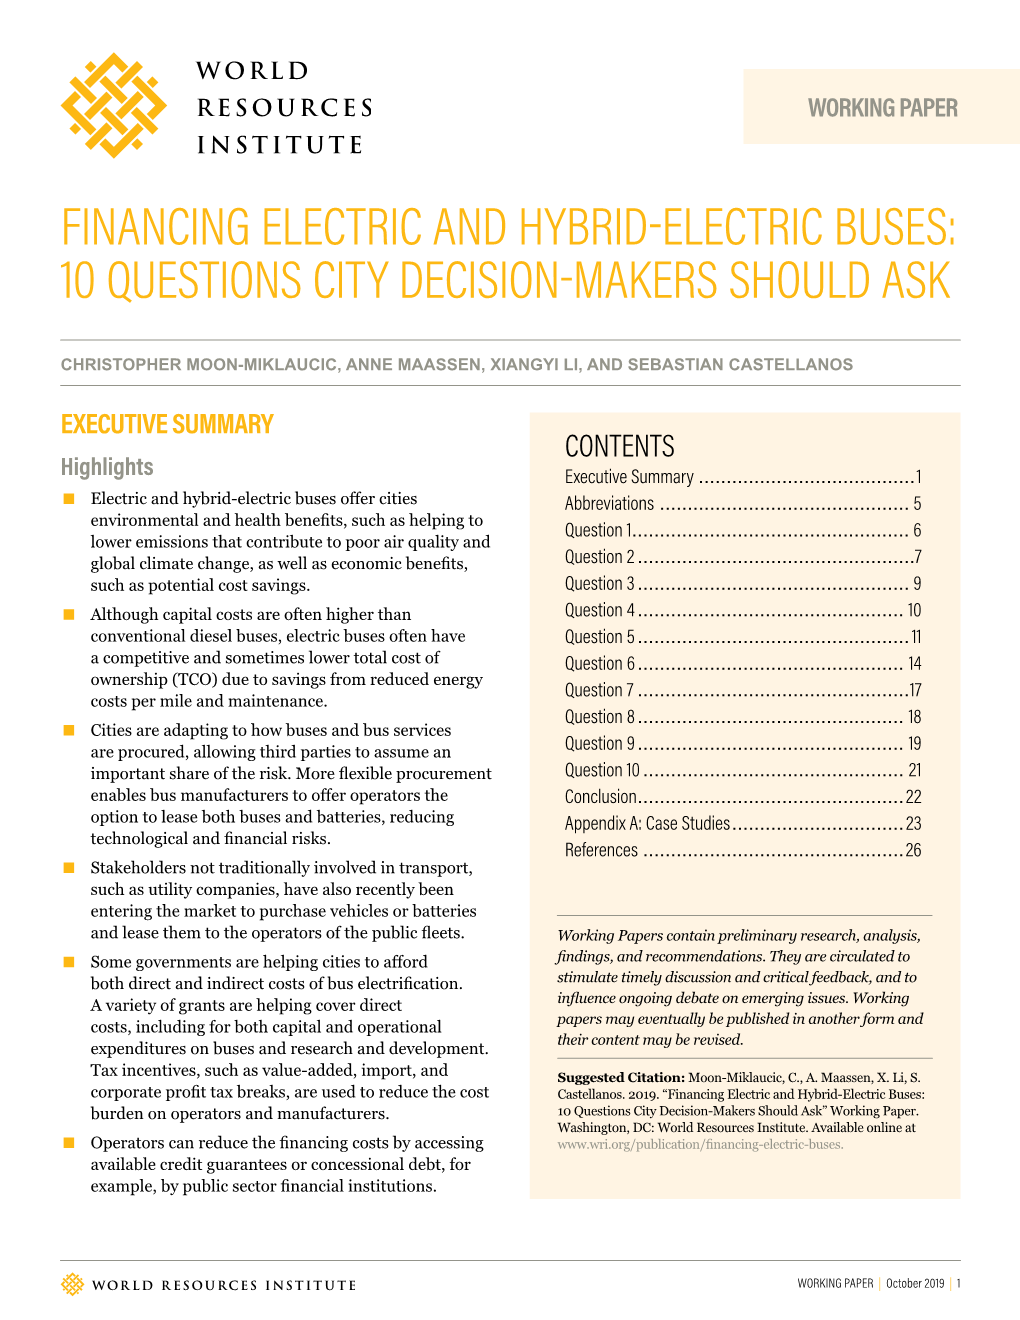 Financing Electric and Hybrid-Electric Buses: 10 Questions City Decision-Makers Should Ask